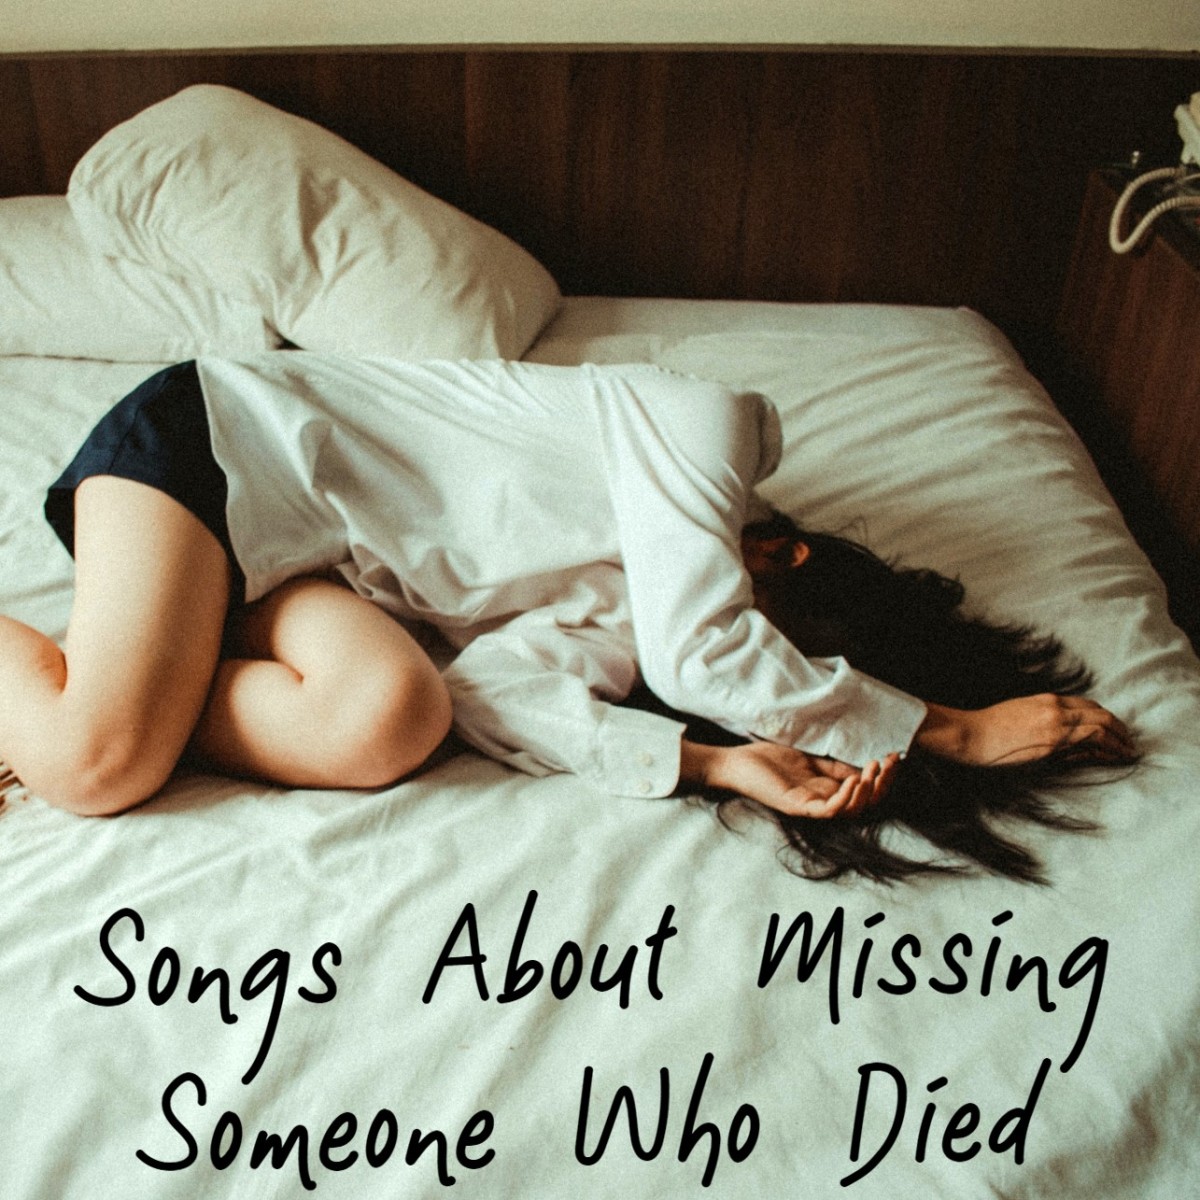 84 Songs About Missing Someone Who Died